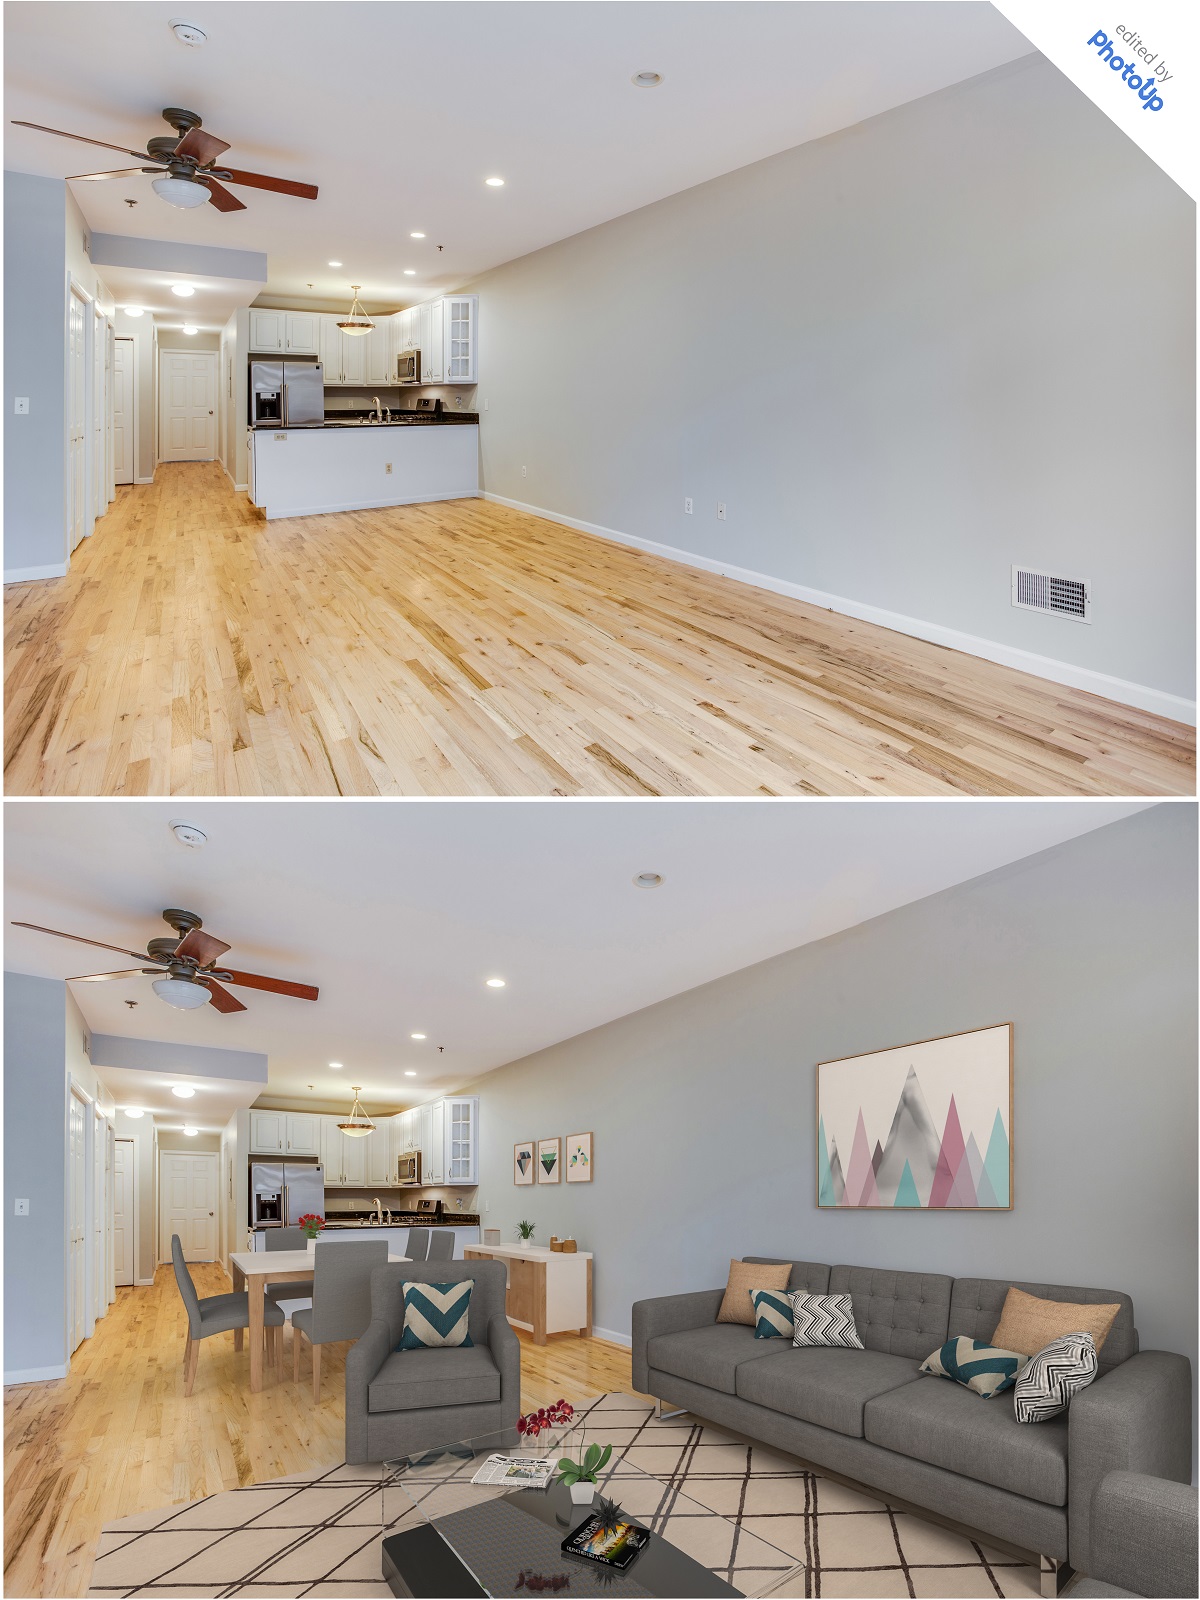 How To Take The Perfect Photos For Virtual Staging